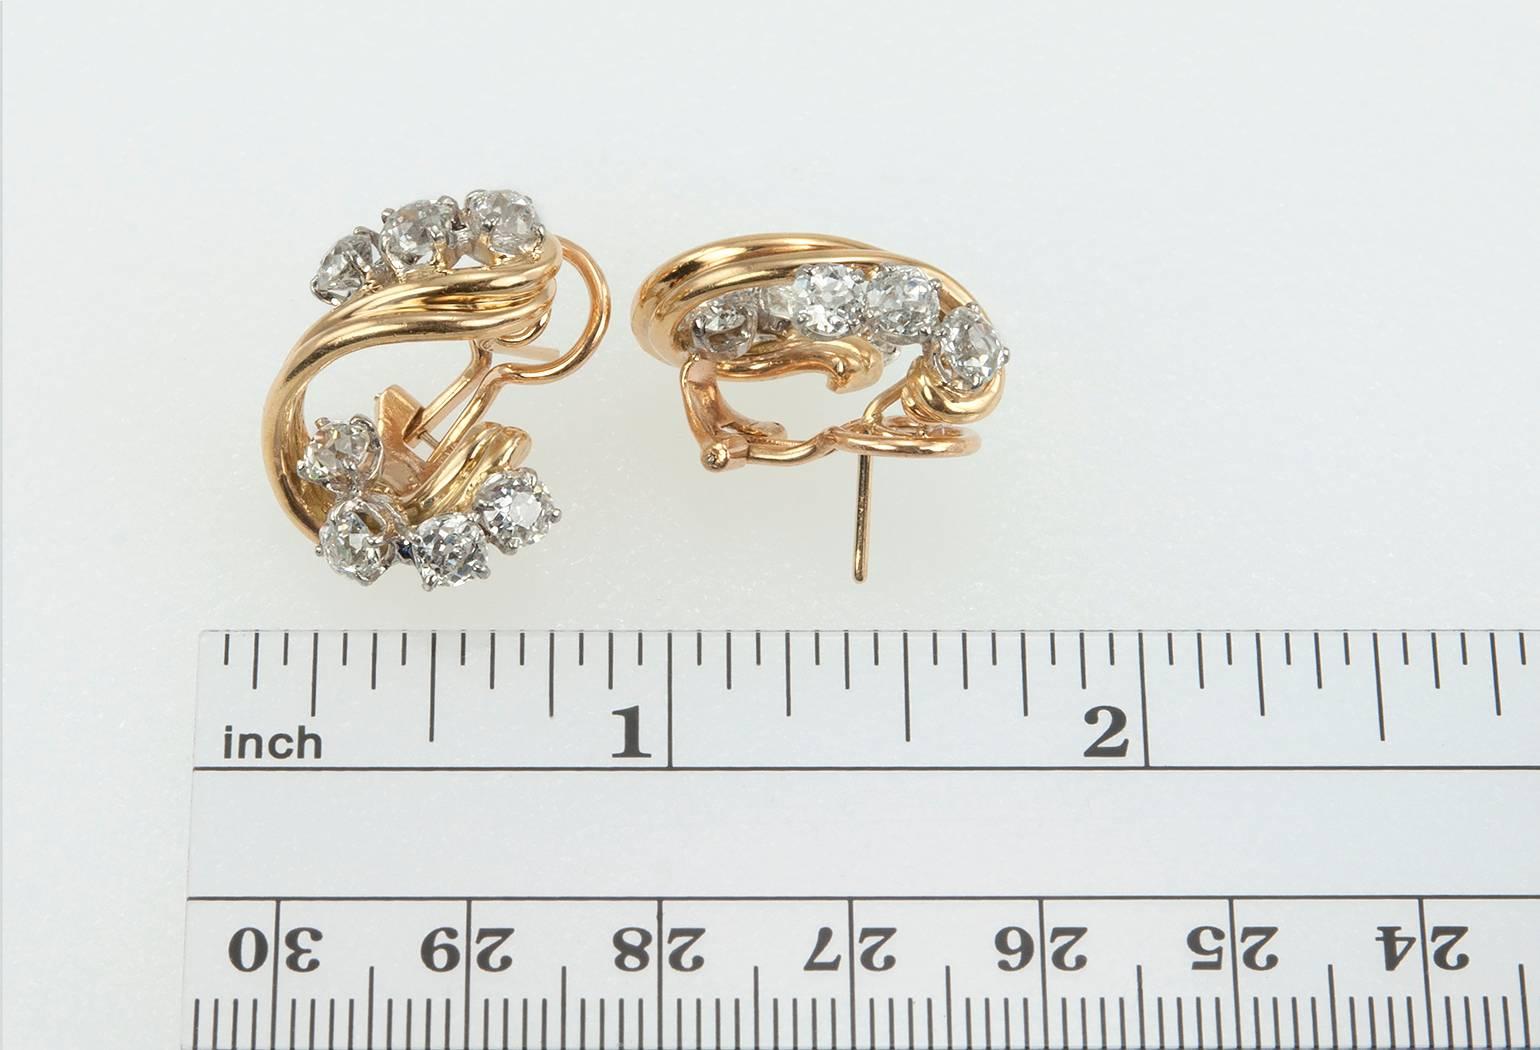 A beautiful pair of diamond 18 karat yellow gold and platinum twist drop earrings with omega backs that sit comfortably and securely on the ear.  These earrings features 14 Old European Cut diamonds that are each approximately 0.25 carats for a